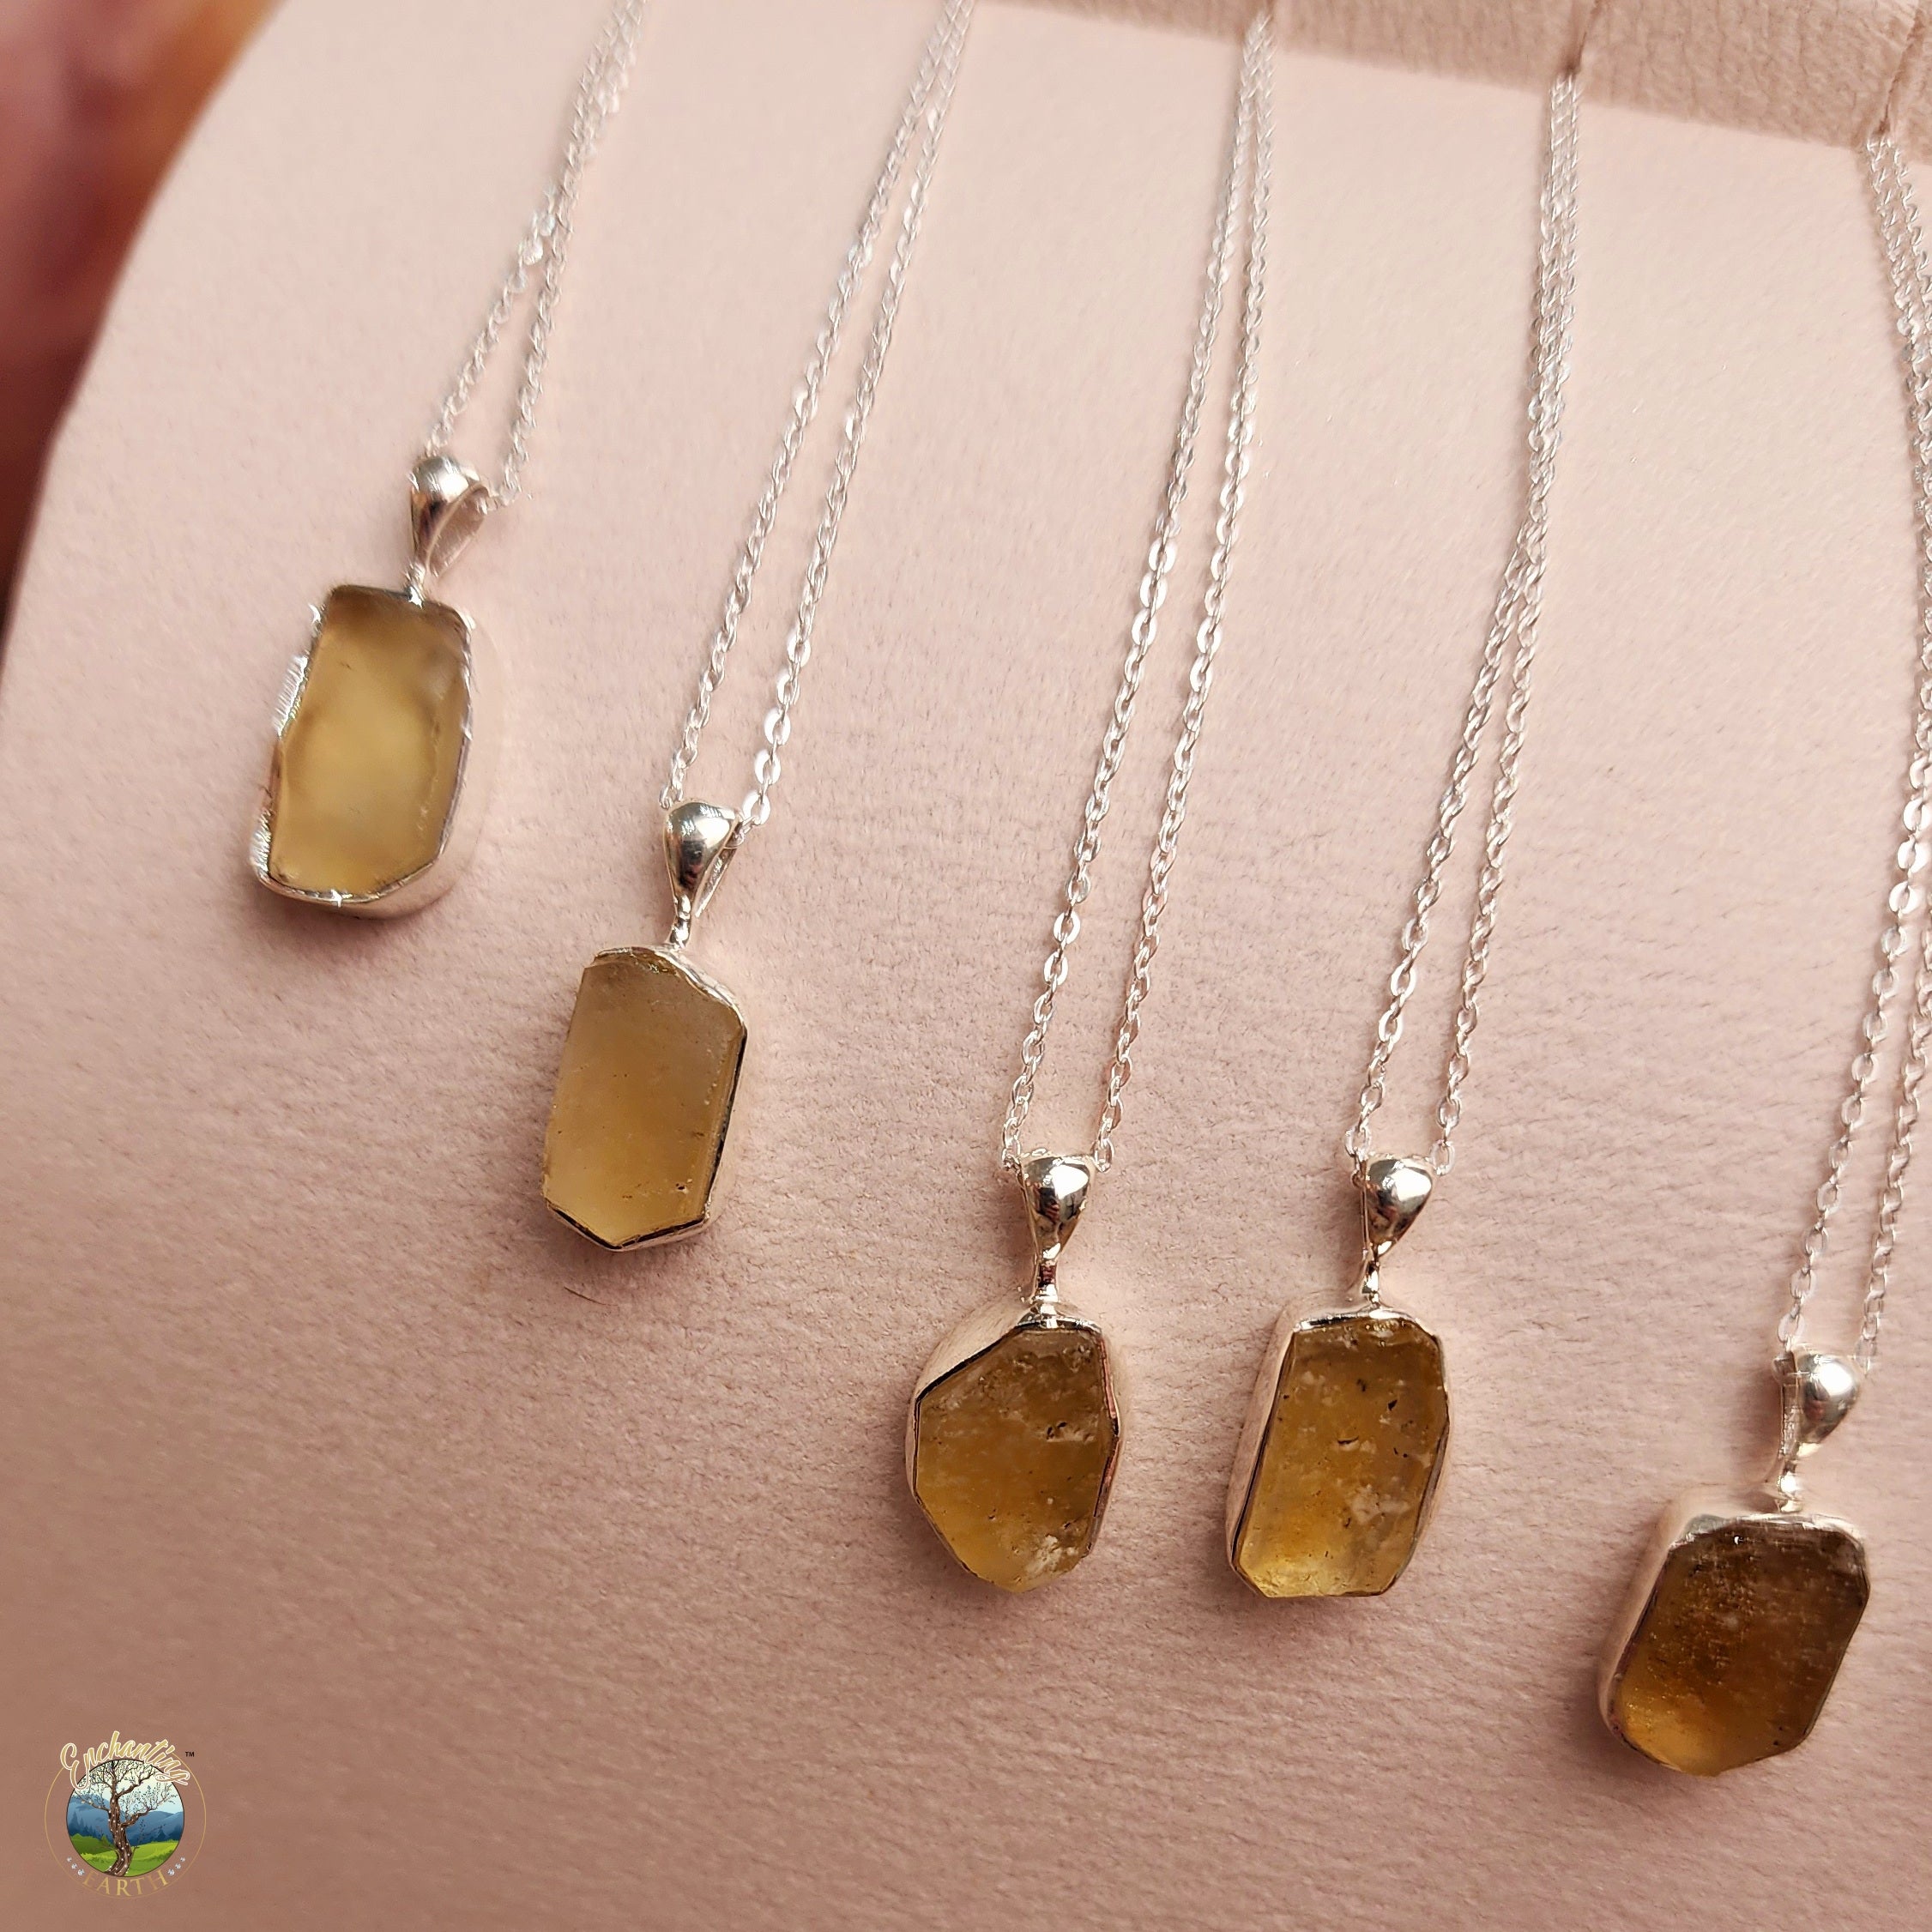 Libyan Desert Glass Raw Necklace .925 Silver for Ascension and Attracting your Desires